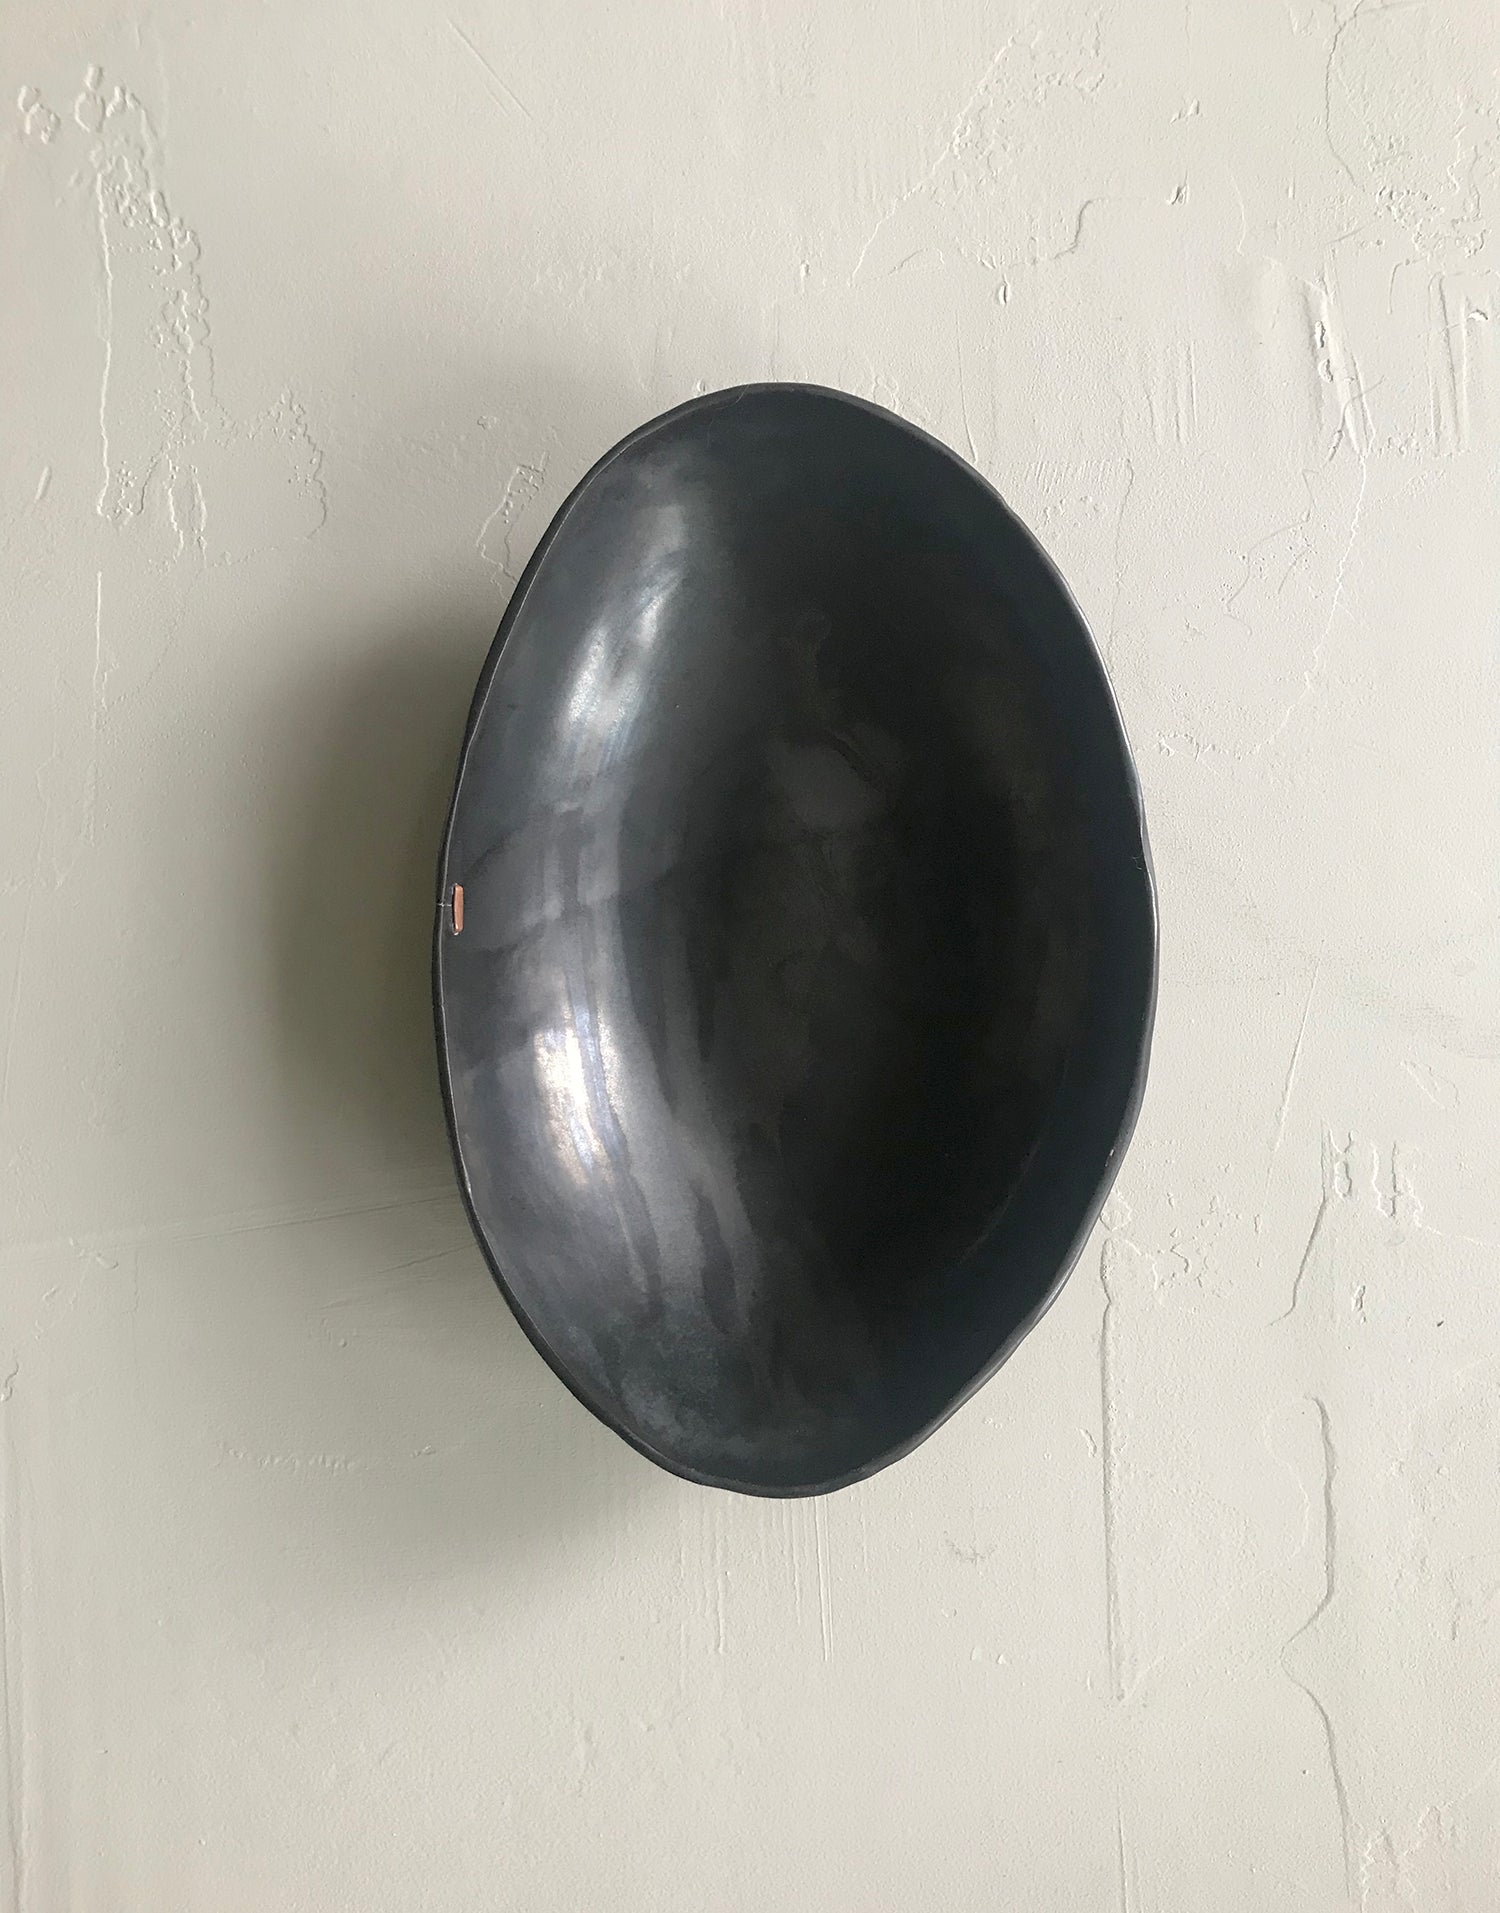 MEND Series 7 Bare Oval Bowl